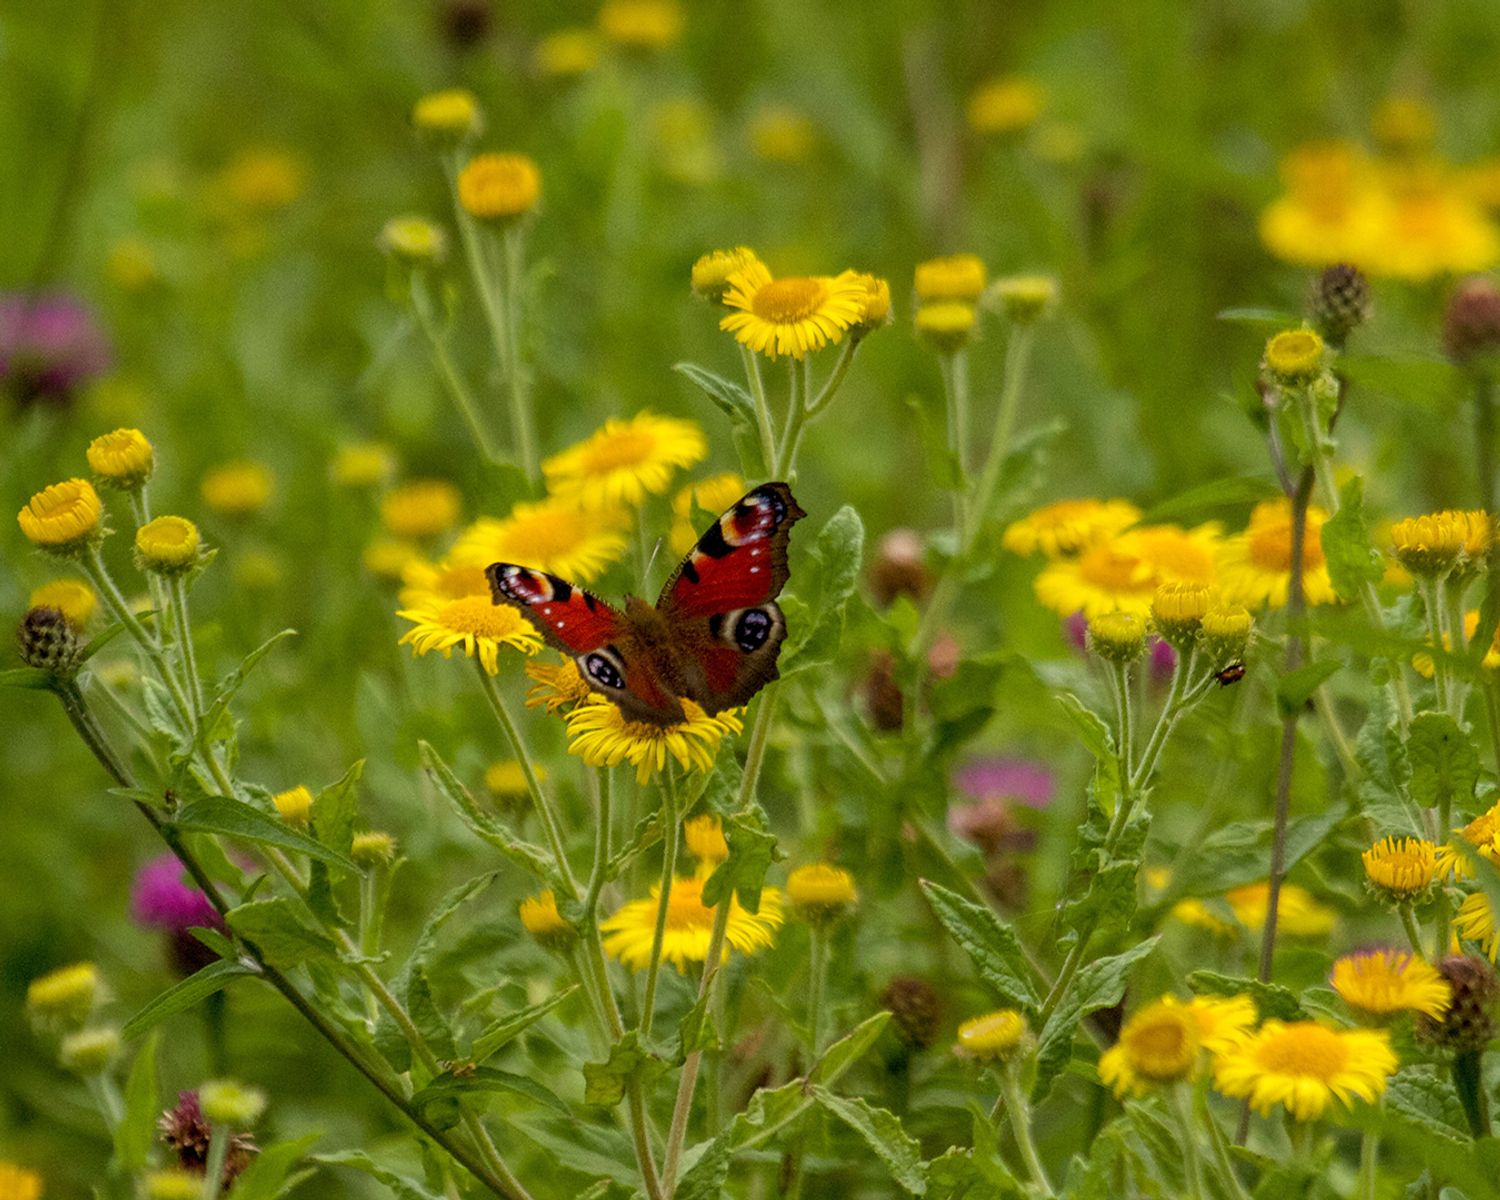 Photo of Red Admiral butterfly in wildflowers  by Heather Wilde on Unsplash